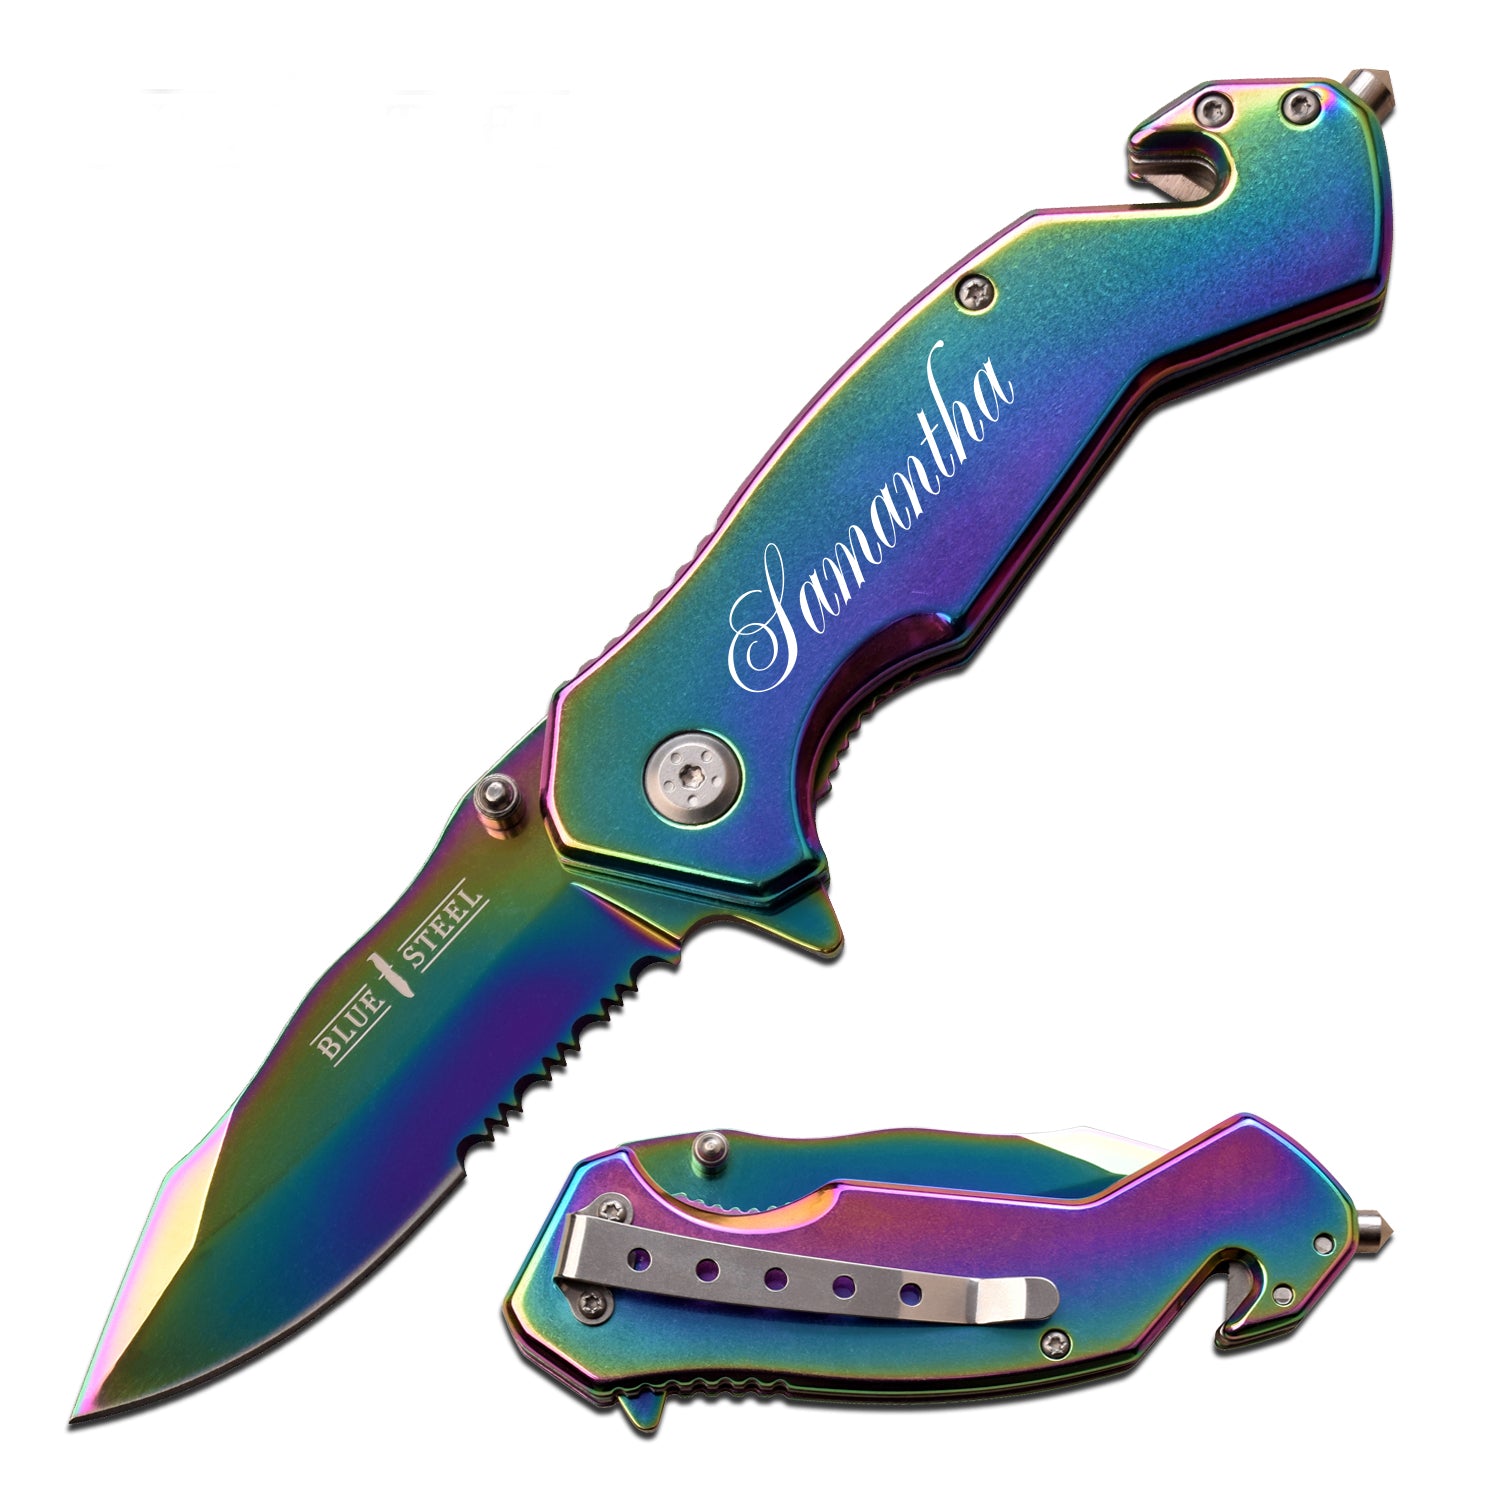 GIFTS INFINITY Customizable Engraved 7.25" Folding Pocket Knife with Seatbelt Cutter and Glass Breaker with Belt Clip